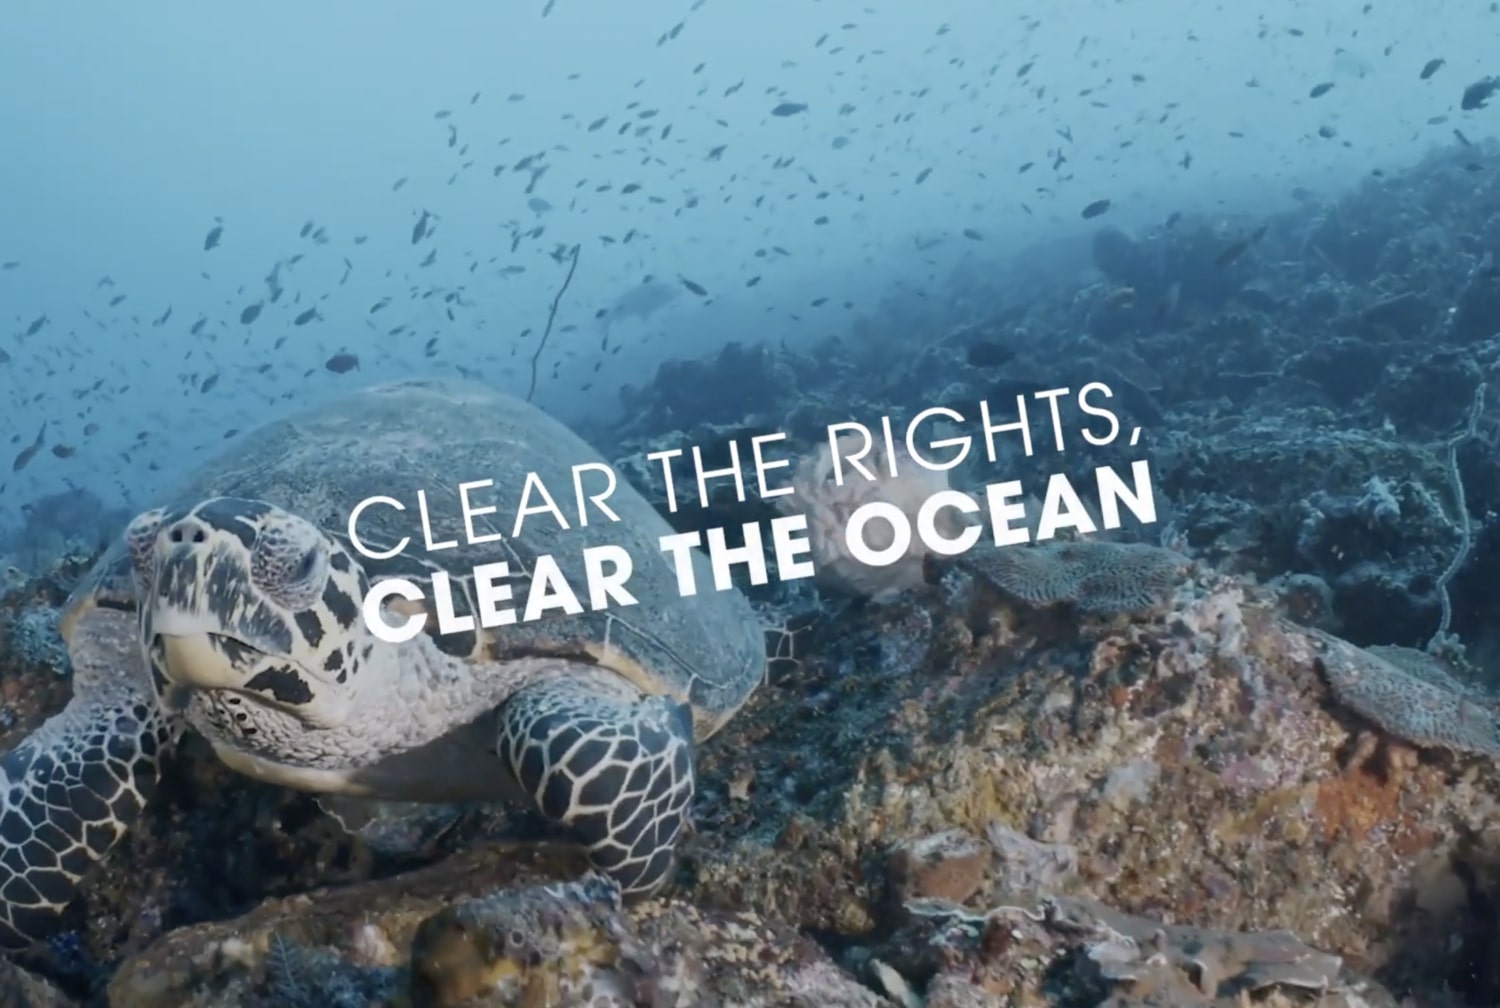 Mauritius images, Clear The Rights, Clear The Ocean